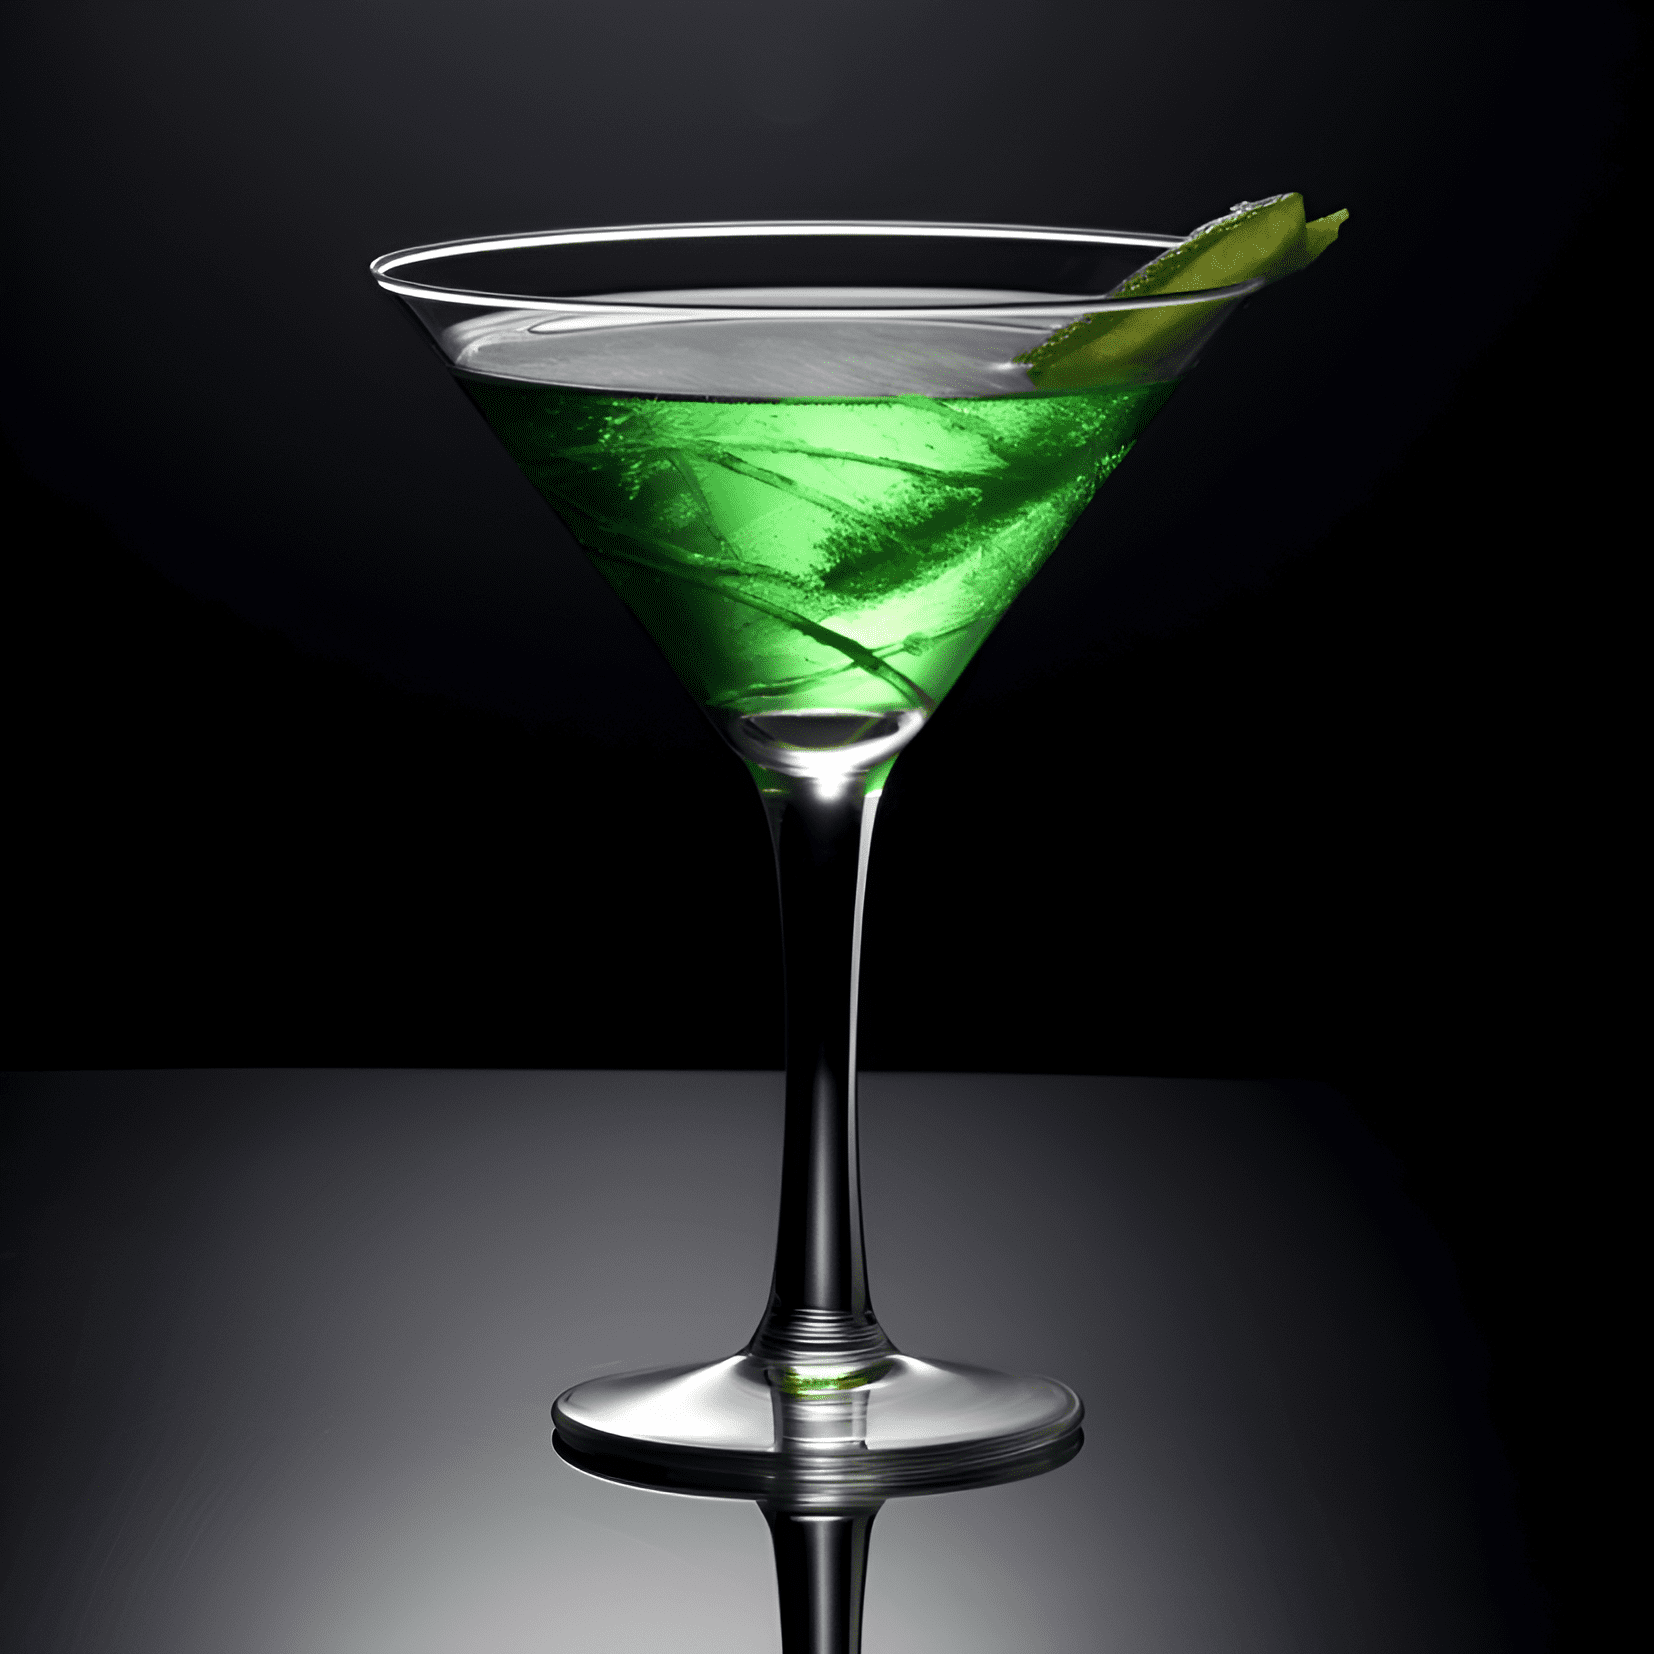 Japanese Slipper Cocktail Recipe - The Japanese Slipper is a sweet and tangy cocktail with a fruity and refreshing taste. It has a smooth and velvety texture, with a hint of sourness from the lemon juice and a subtle sweetness from the Midori and Cointreau.